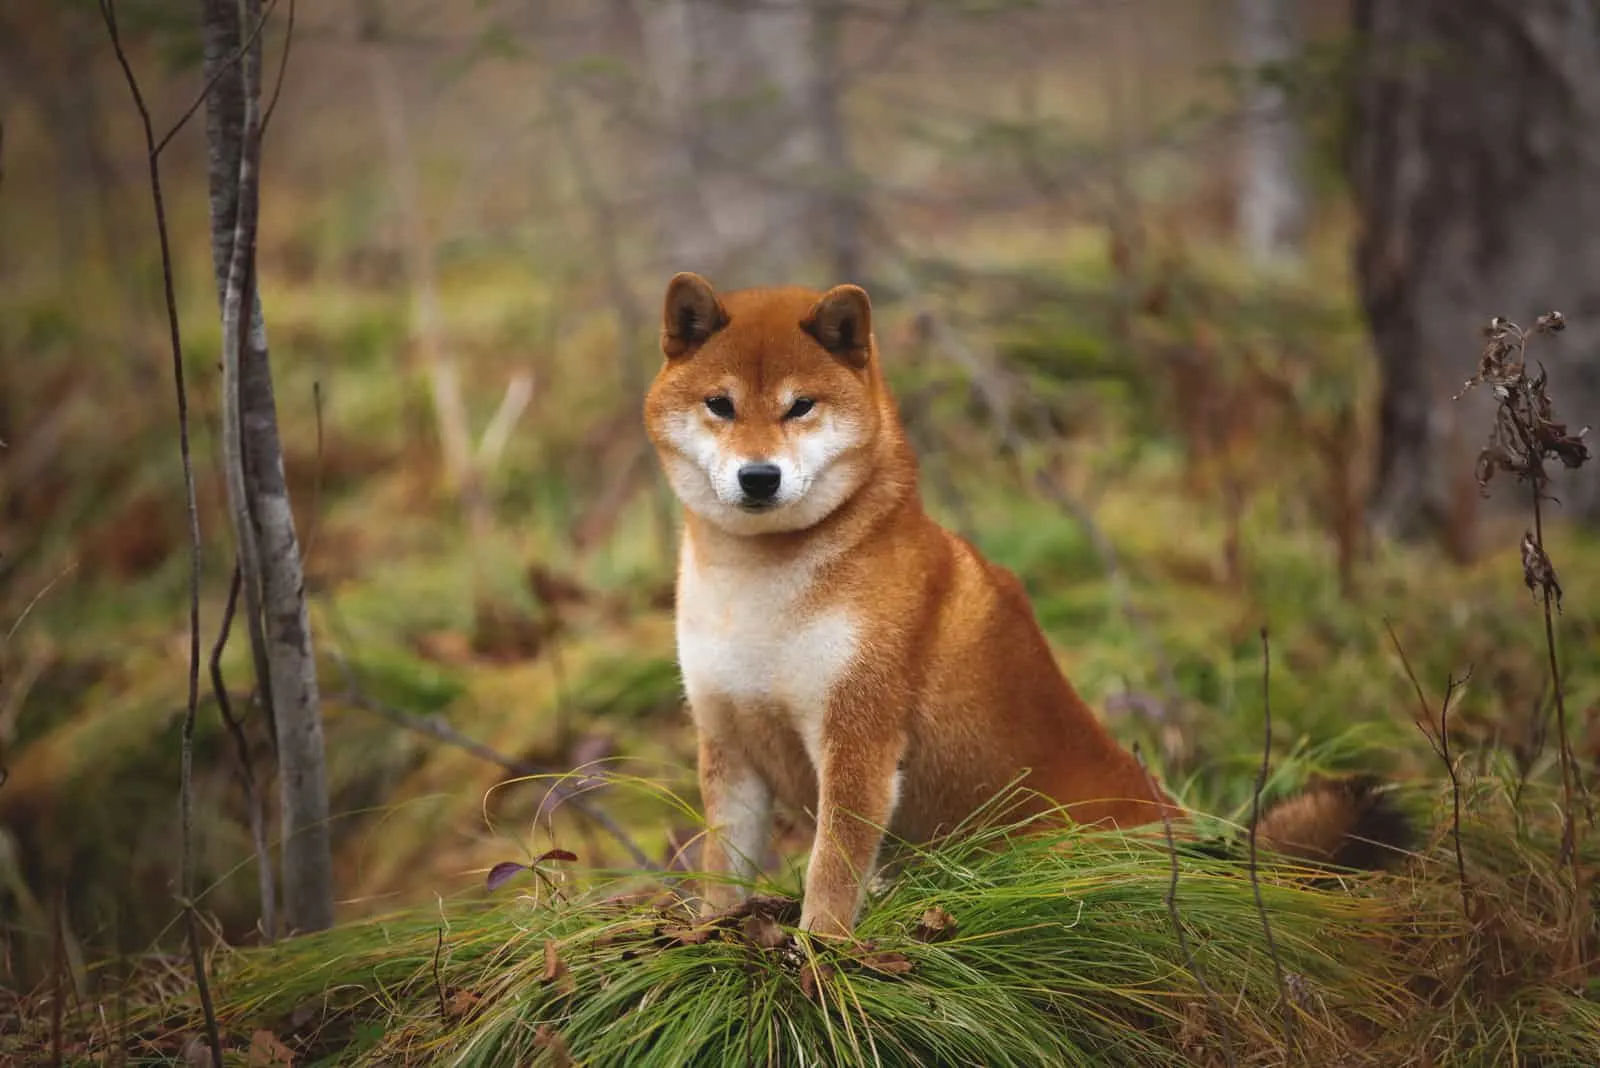 shiba inu dog sitting on the grass in the forest